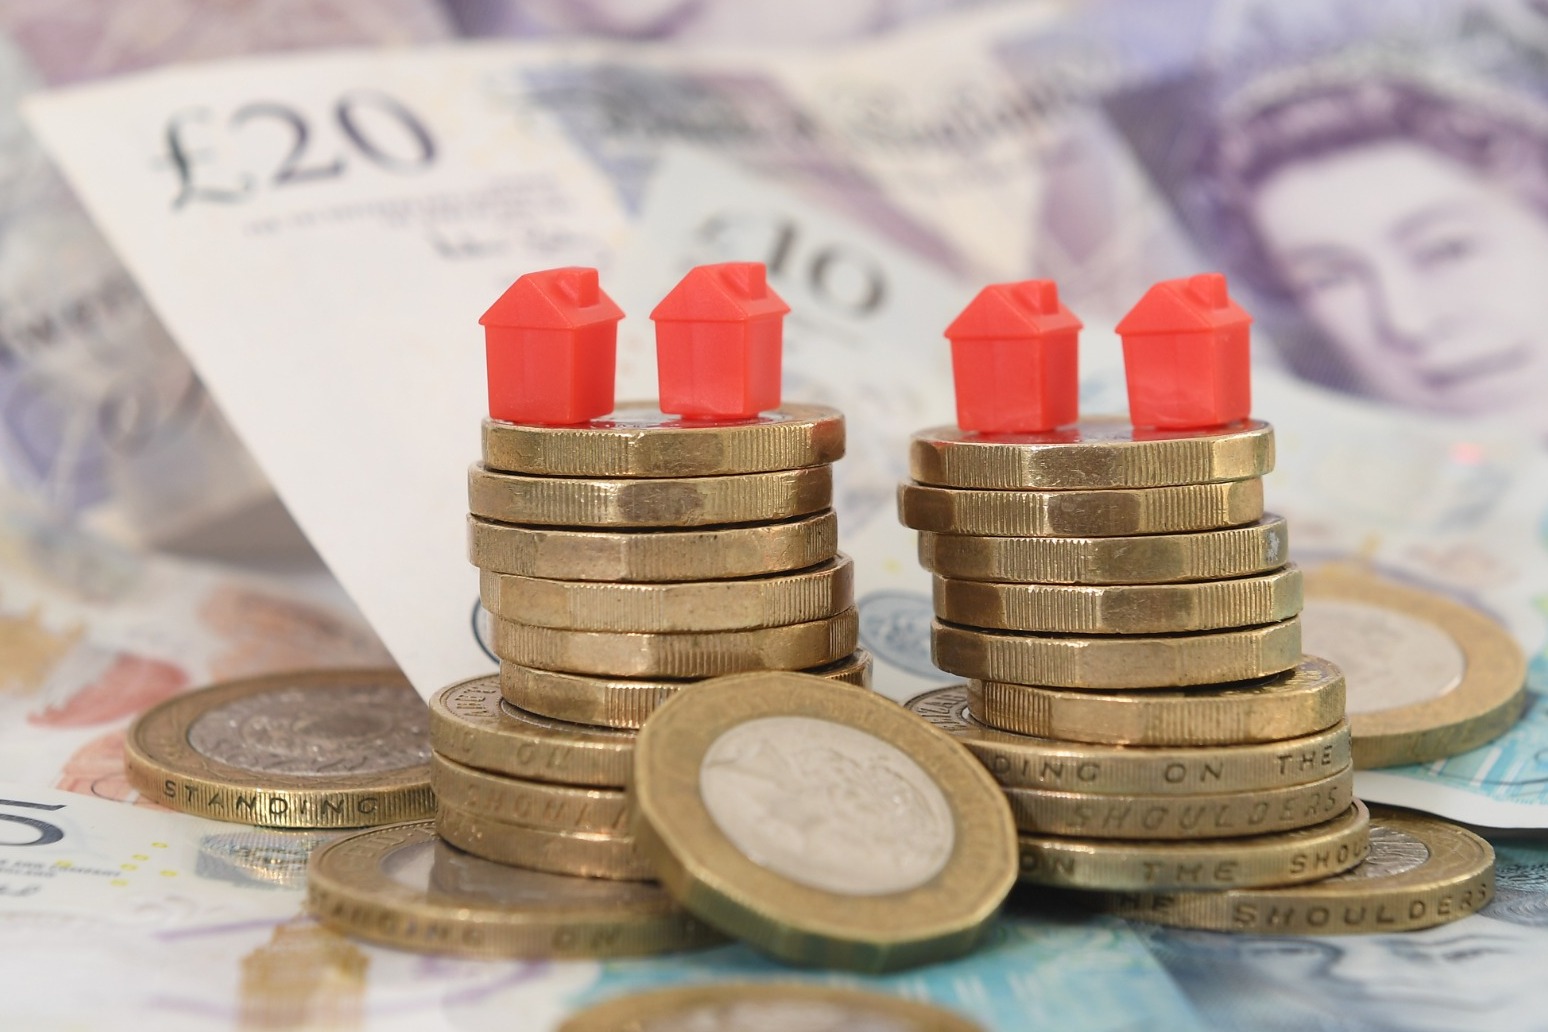 Choice of mortgage deals tops 5,000 